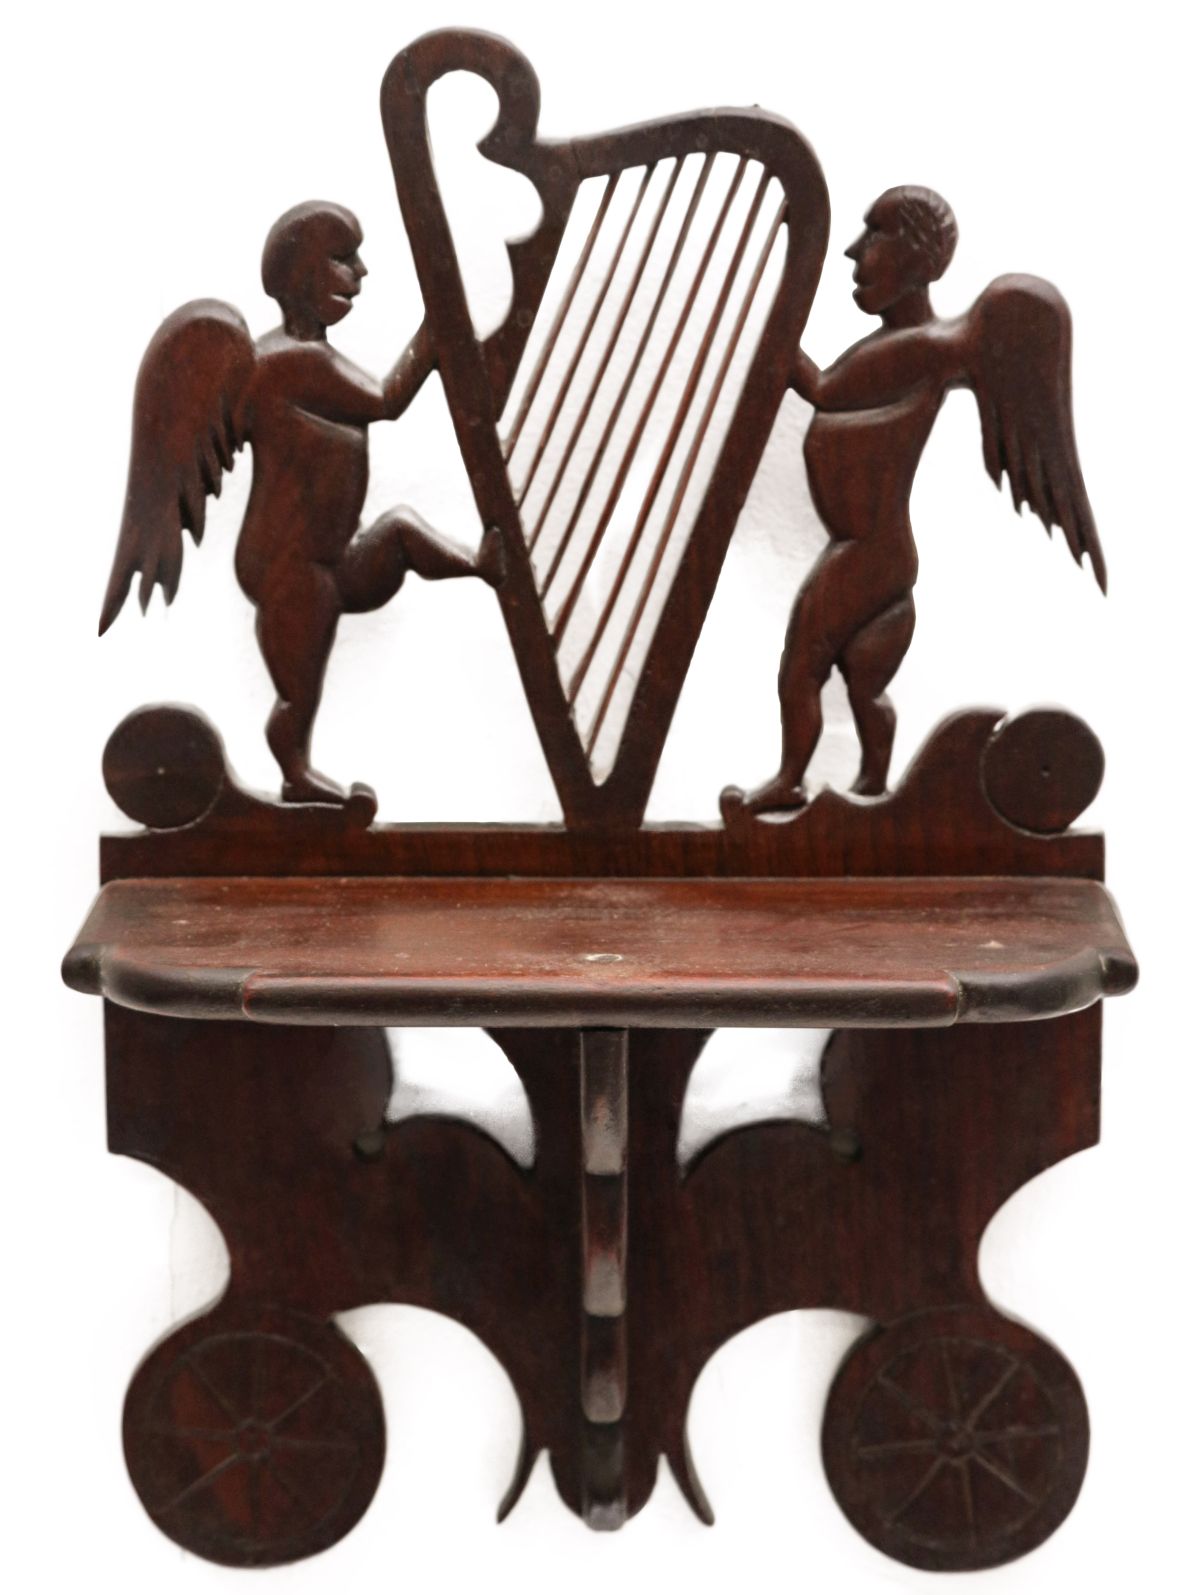 A CARVED FOLK ART SHELF WITH ANGEL AND HARP SILHOUETTE